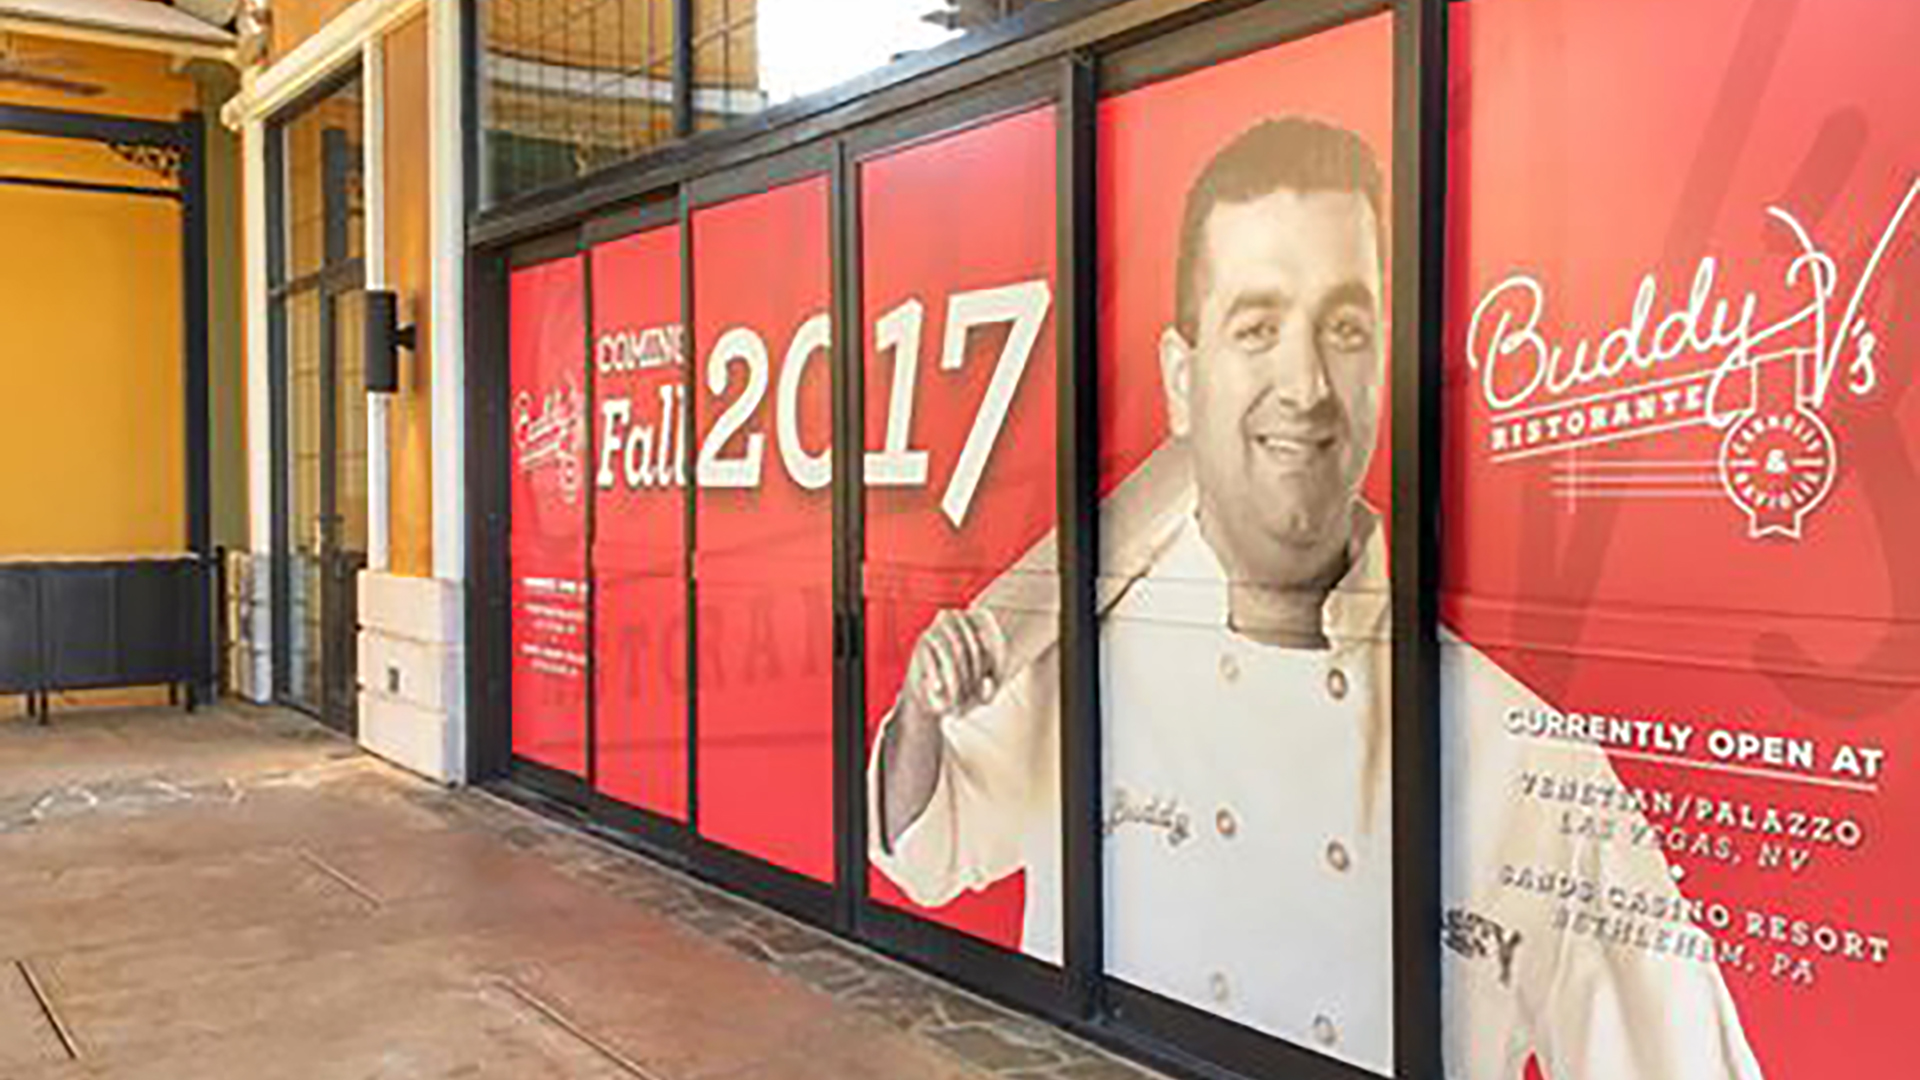 Cake Boss Buddy Valastro launches Boss Cafe in Las Vegas, Food